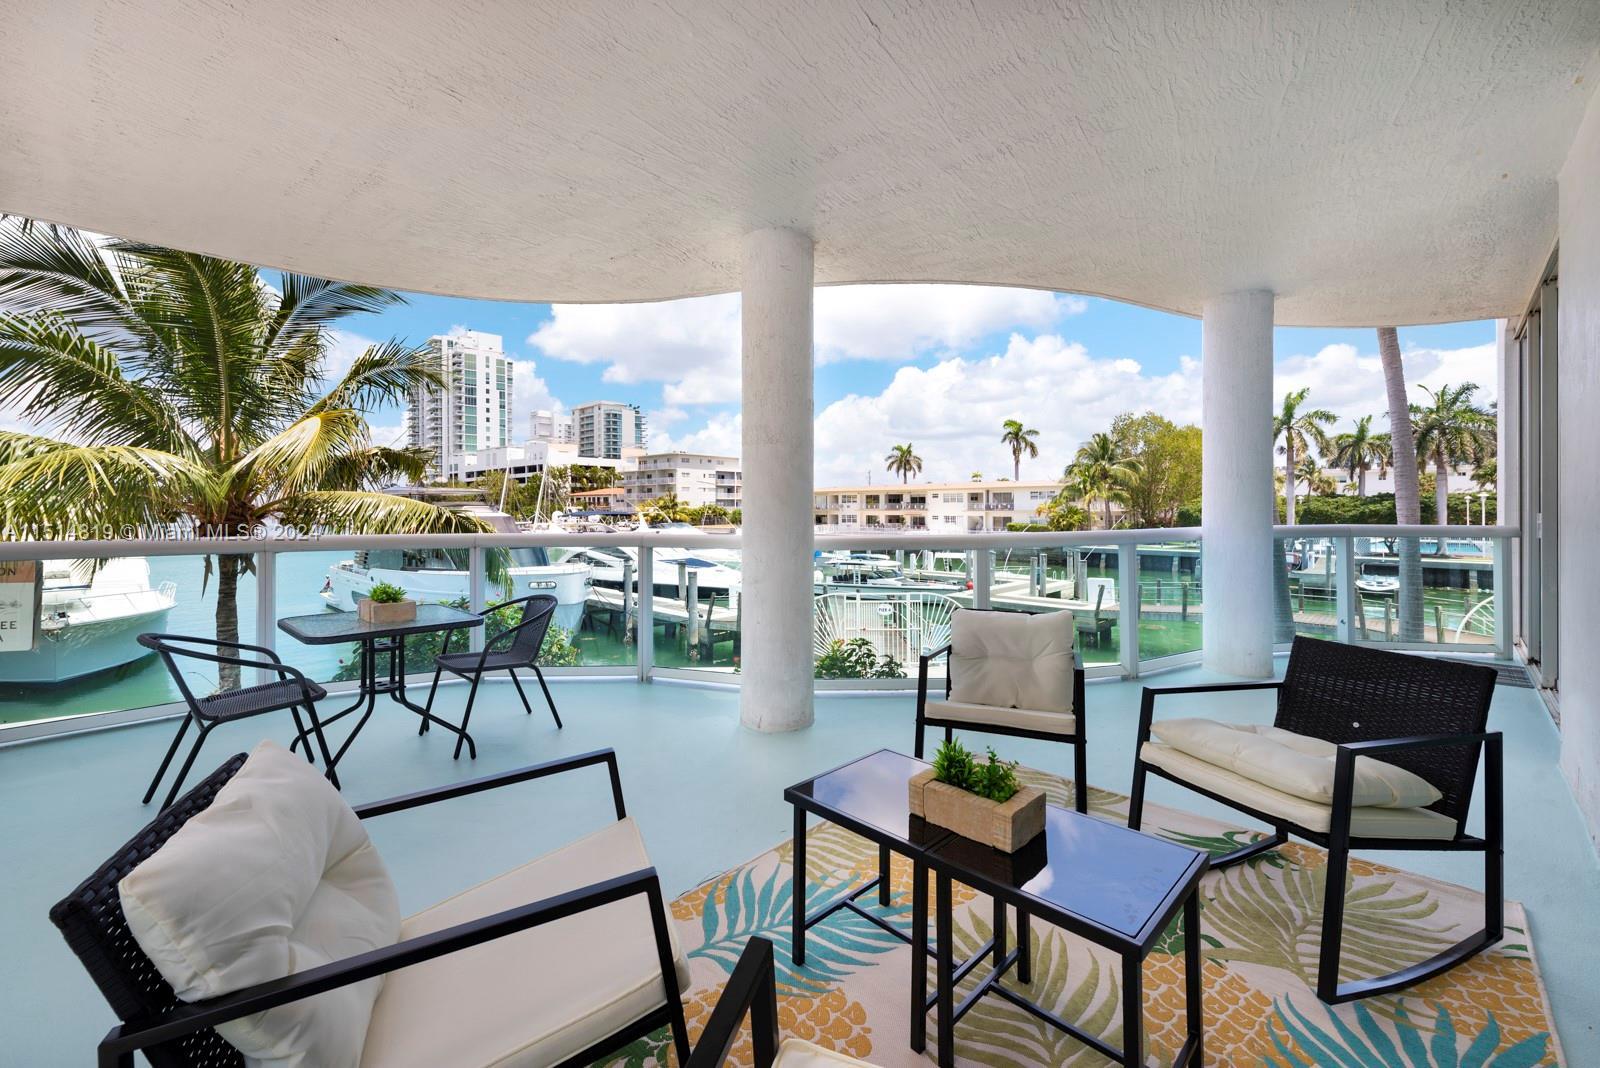 Experience the epitome of marina living with this rare corner unit boasting a spectacular 180 degree